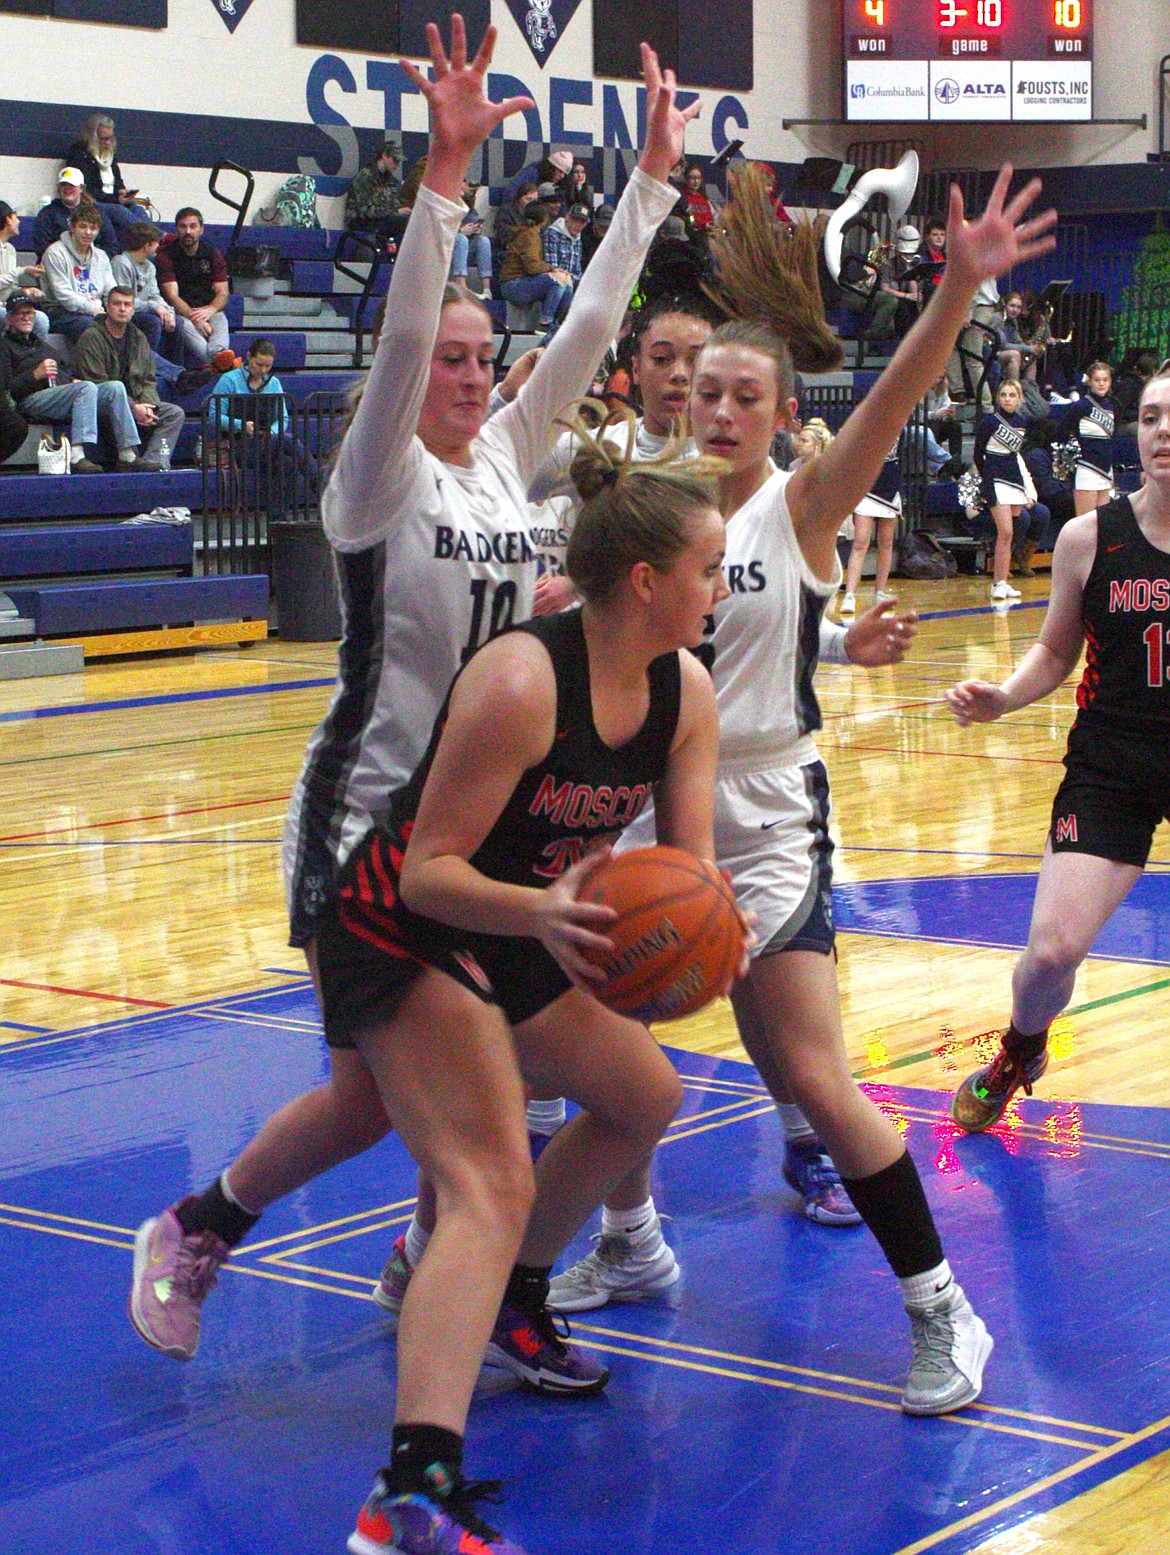 Markynn Pulid and Rylie Kimball play tough defense against Moscow earlier in the season.